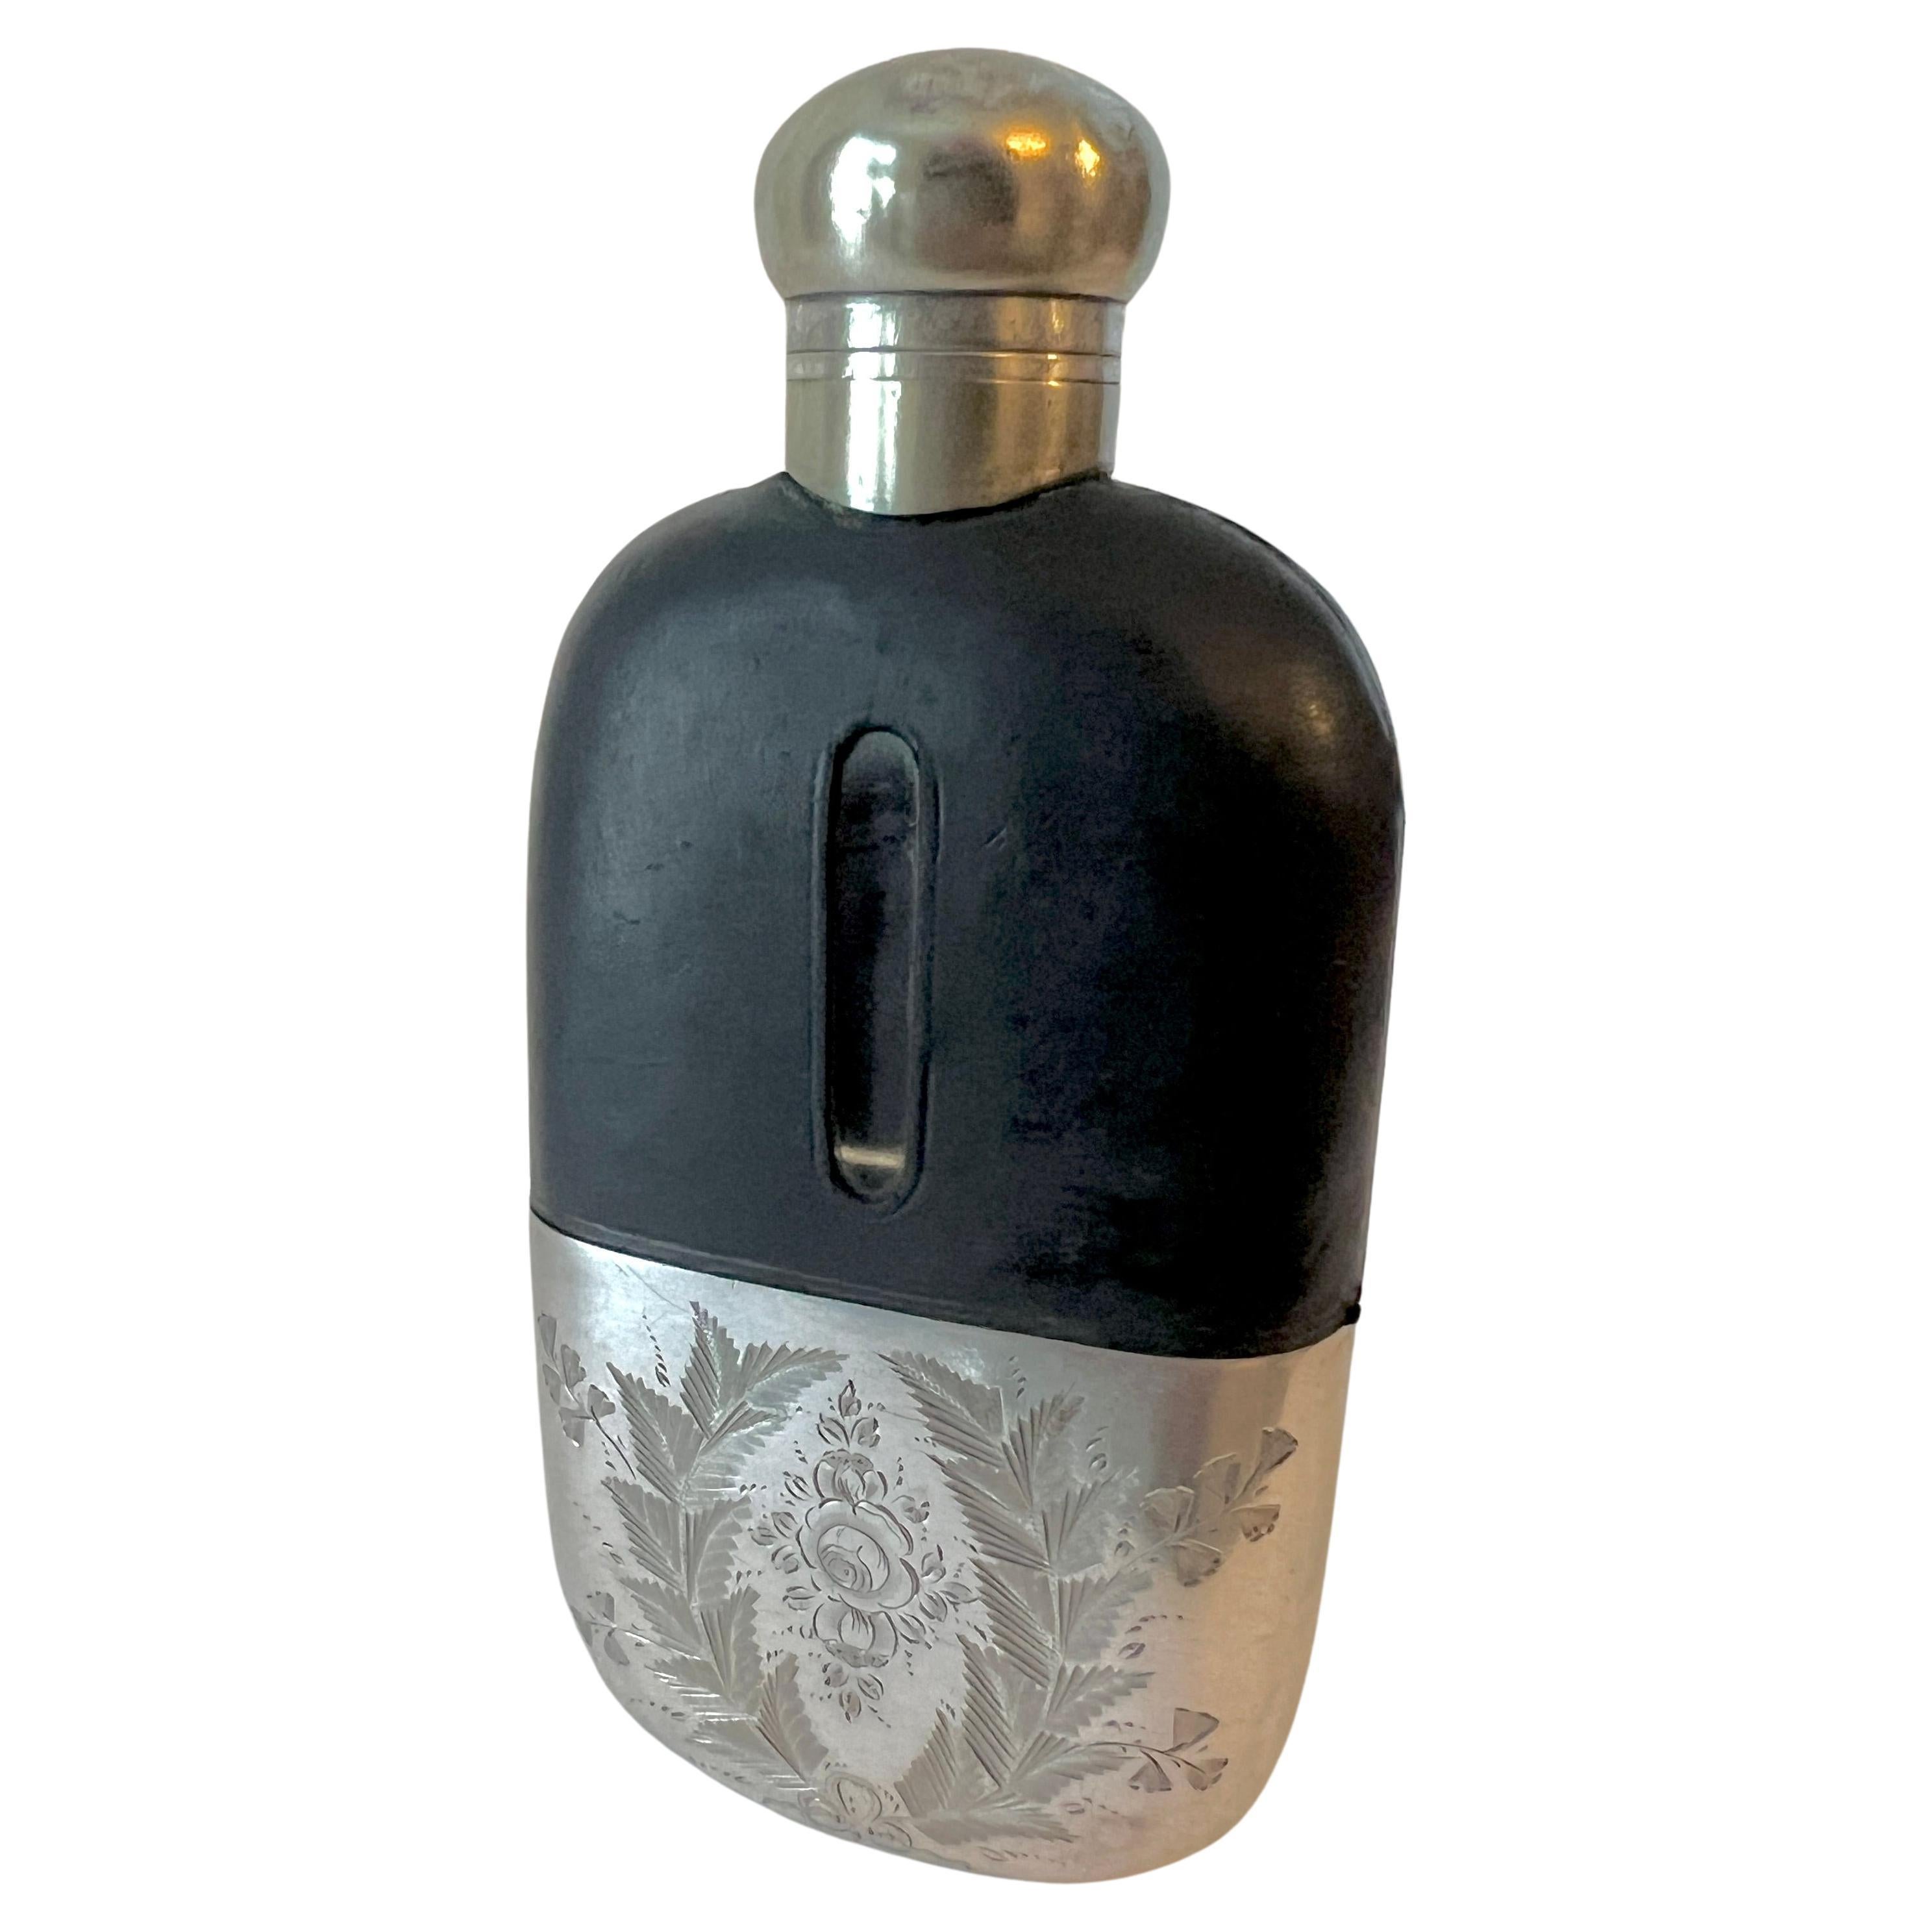 a wonderful Glass Flask with a leather top and Silver plate etched base / drinking cup.

The piece is perfect for the occasional hidden nip and decorative enough to boast to your friends or as a decorative piece.  The top portion is leather with a